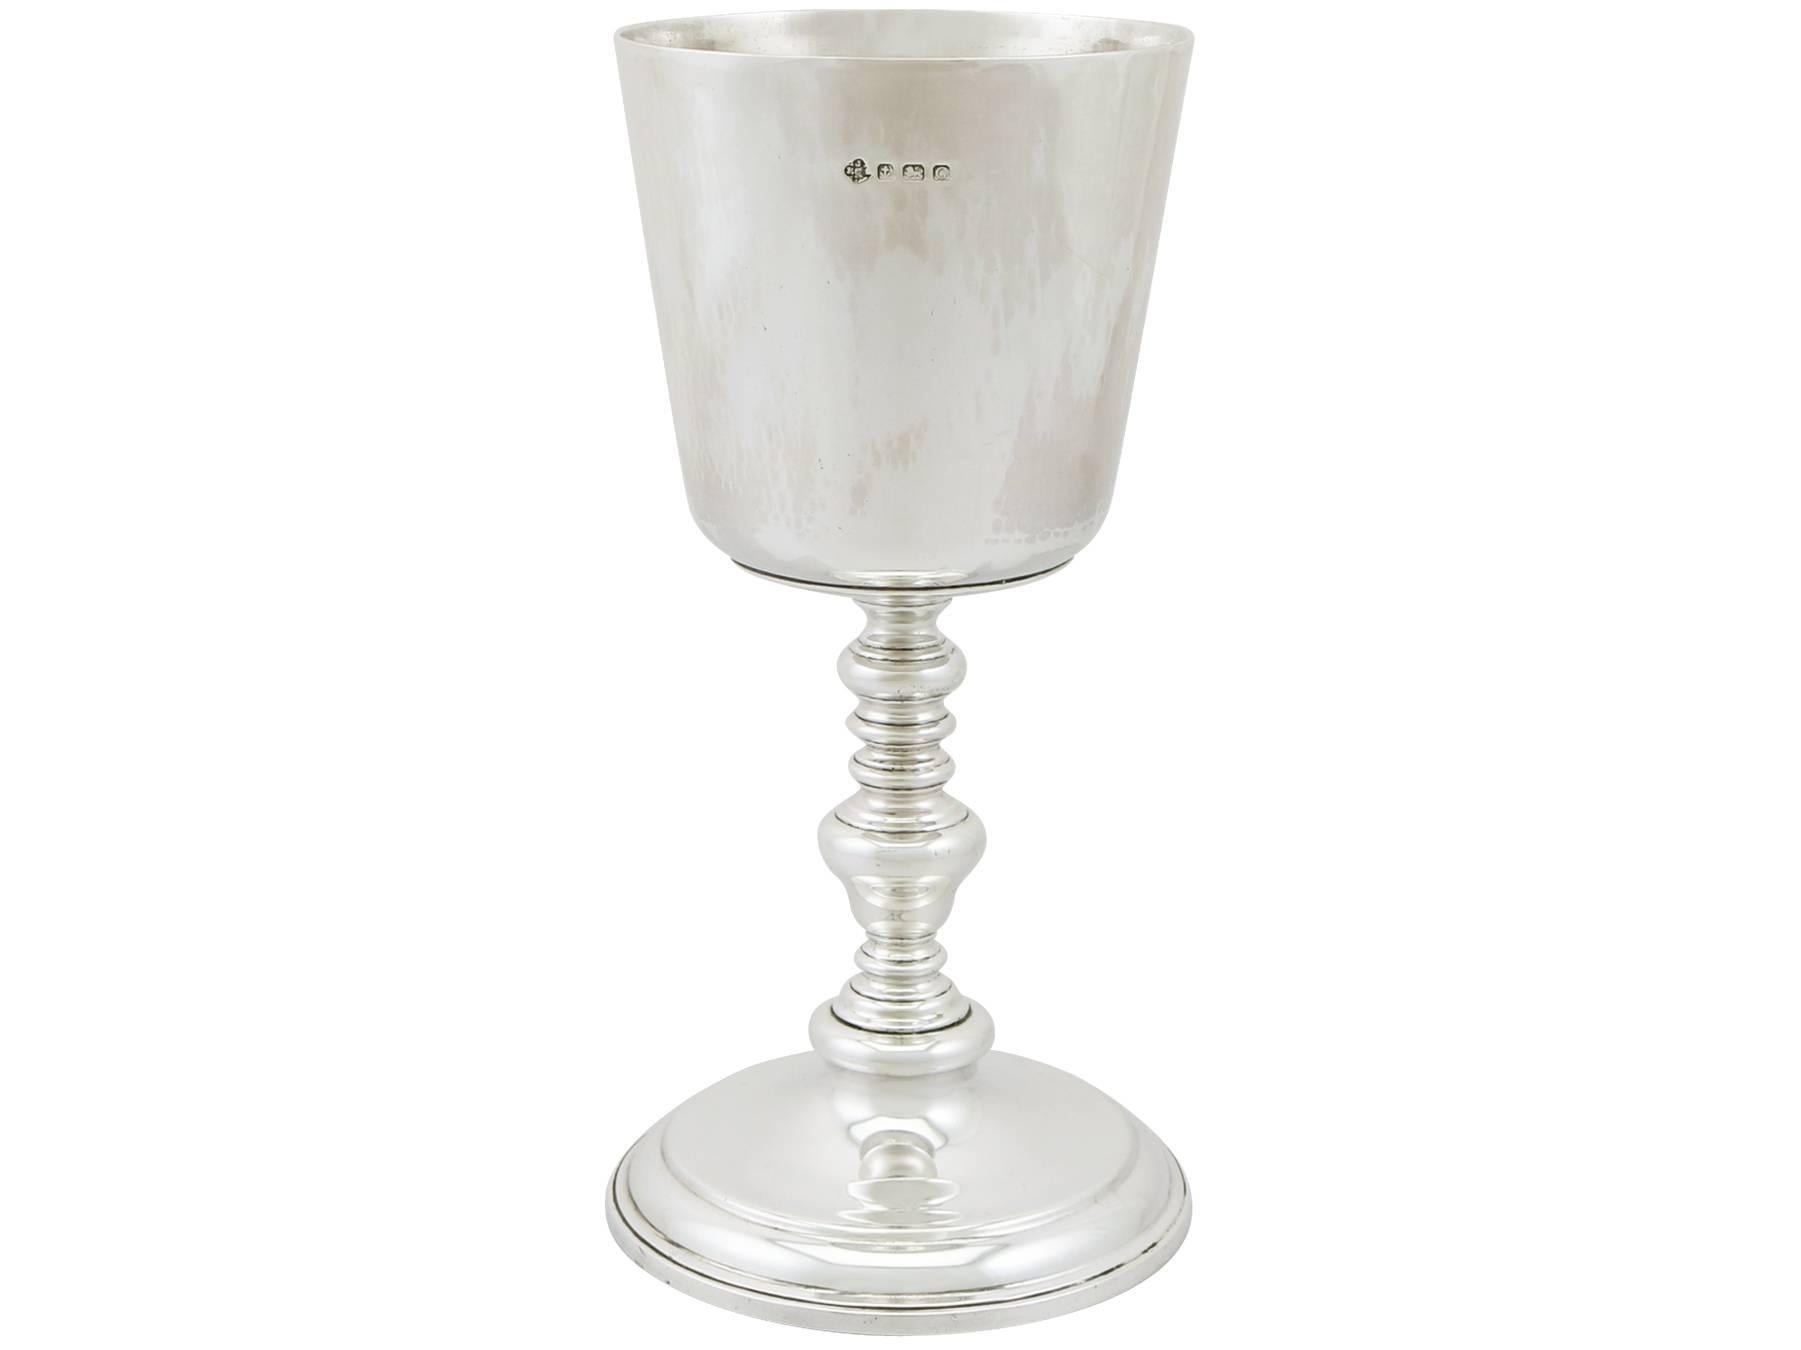 An exceptional, fine and impressive, large antique George V English sterling silver chalice; an addition to our collection of wine and drinks related silverware.

This exceptional antique George V English sterling silver ecclesiastical chalice has